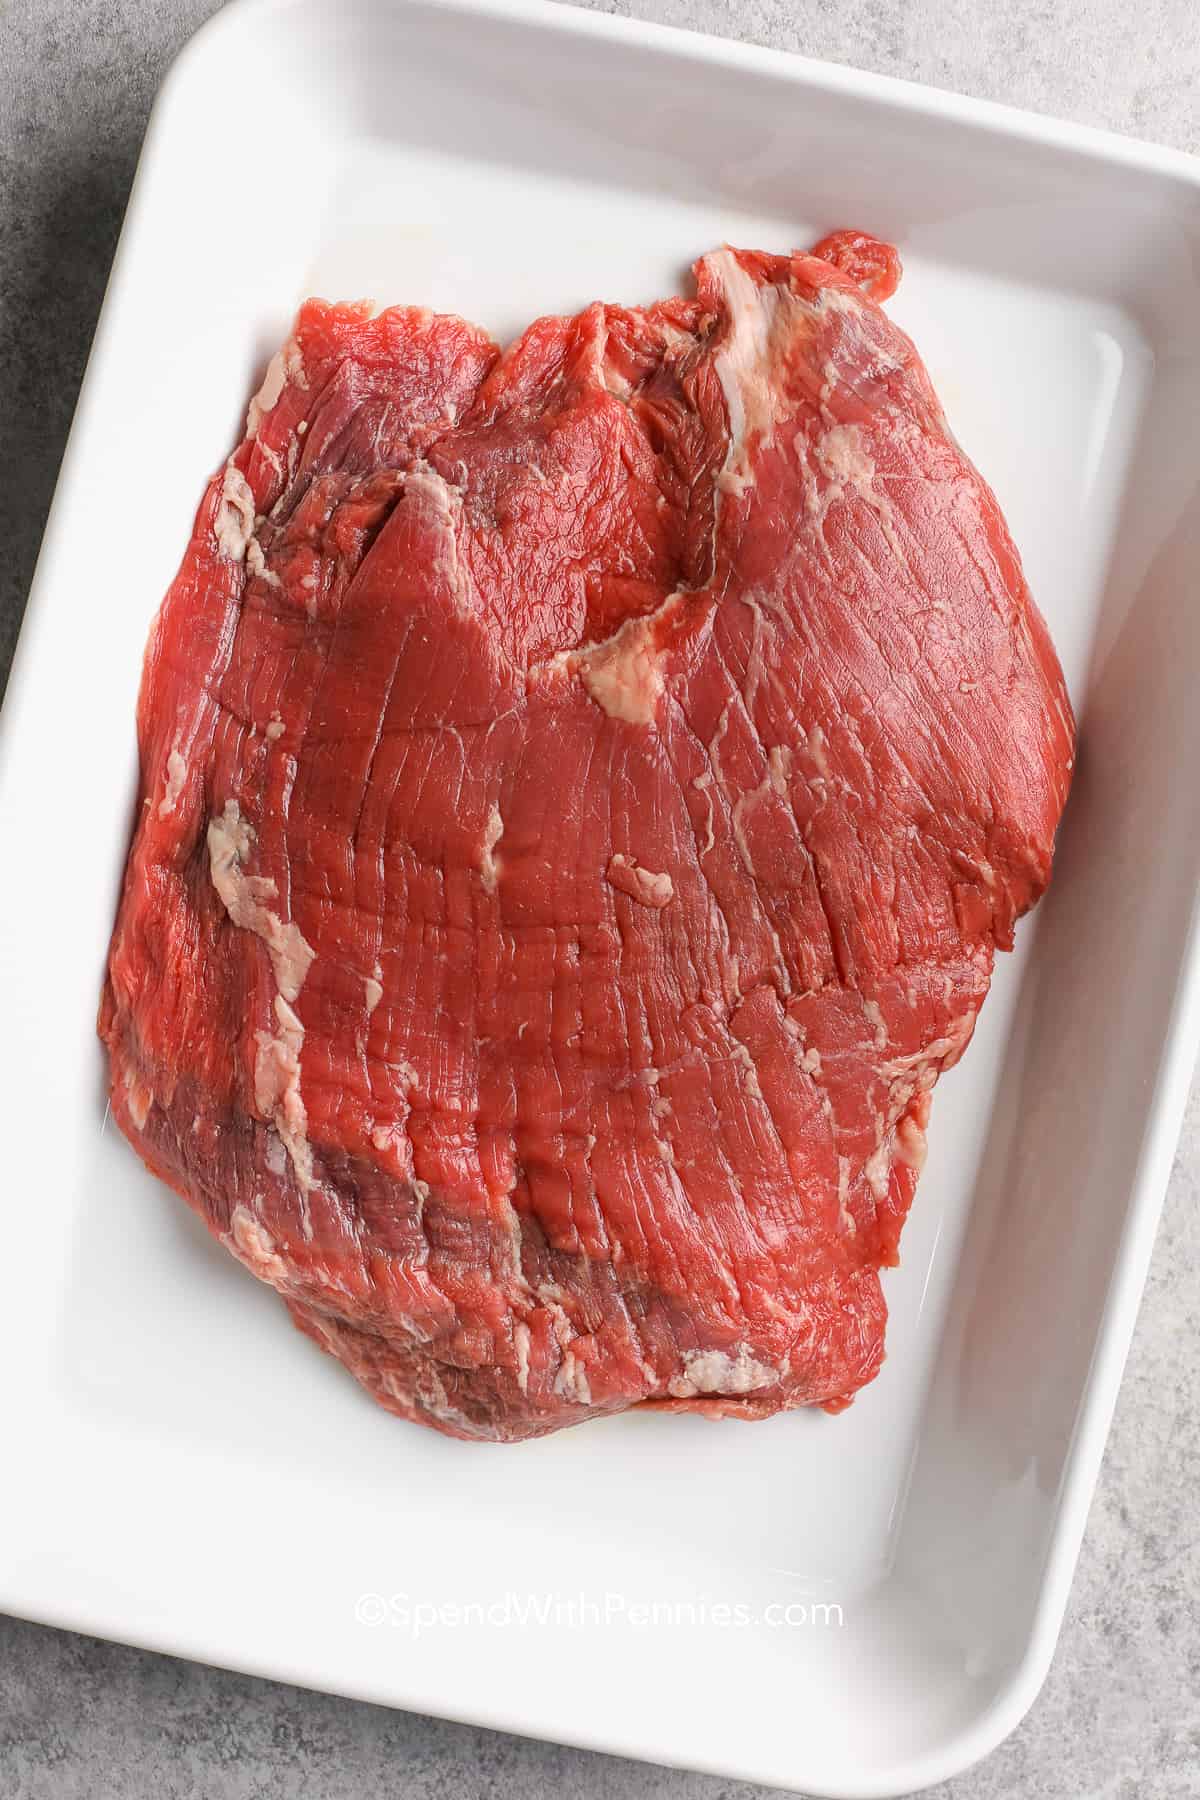 uncooked flank steak in a white baking dish